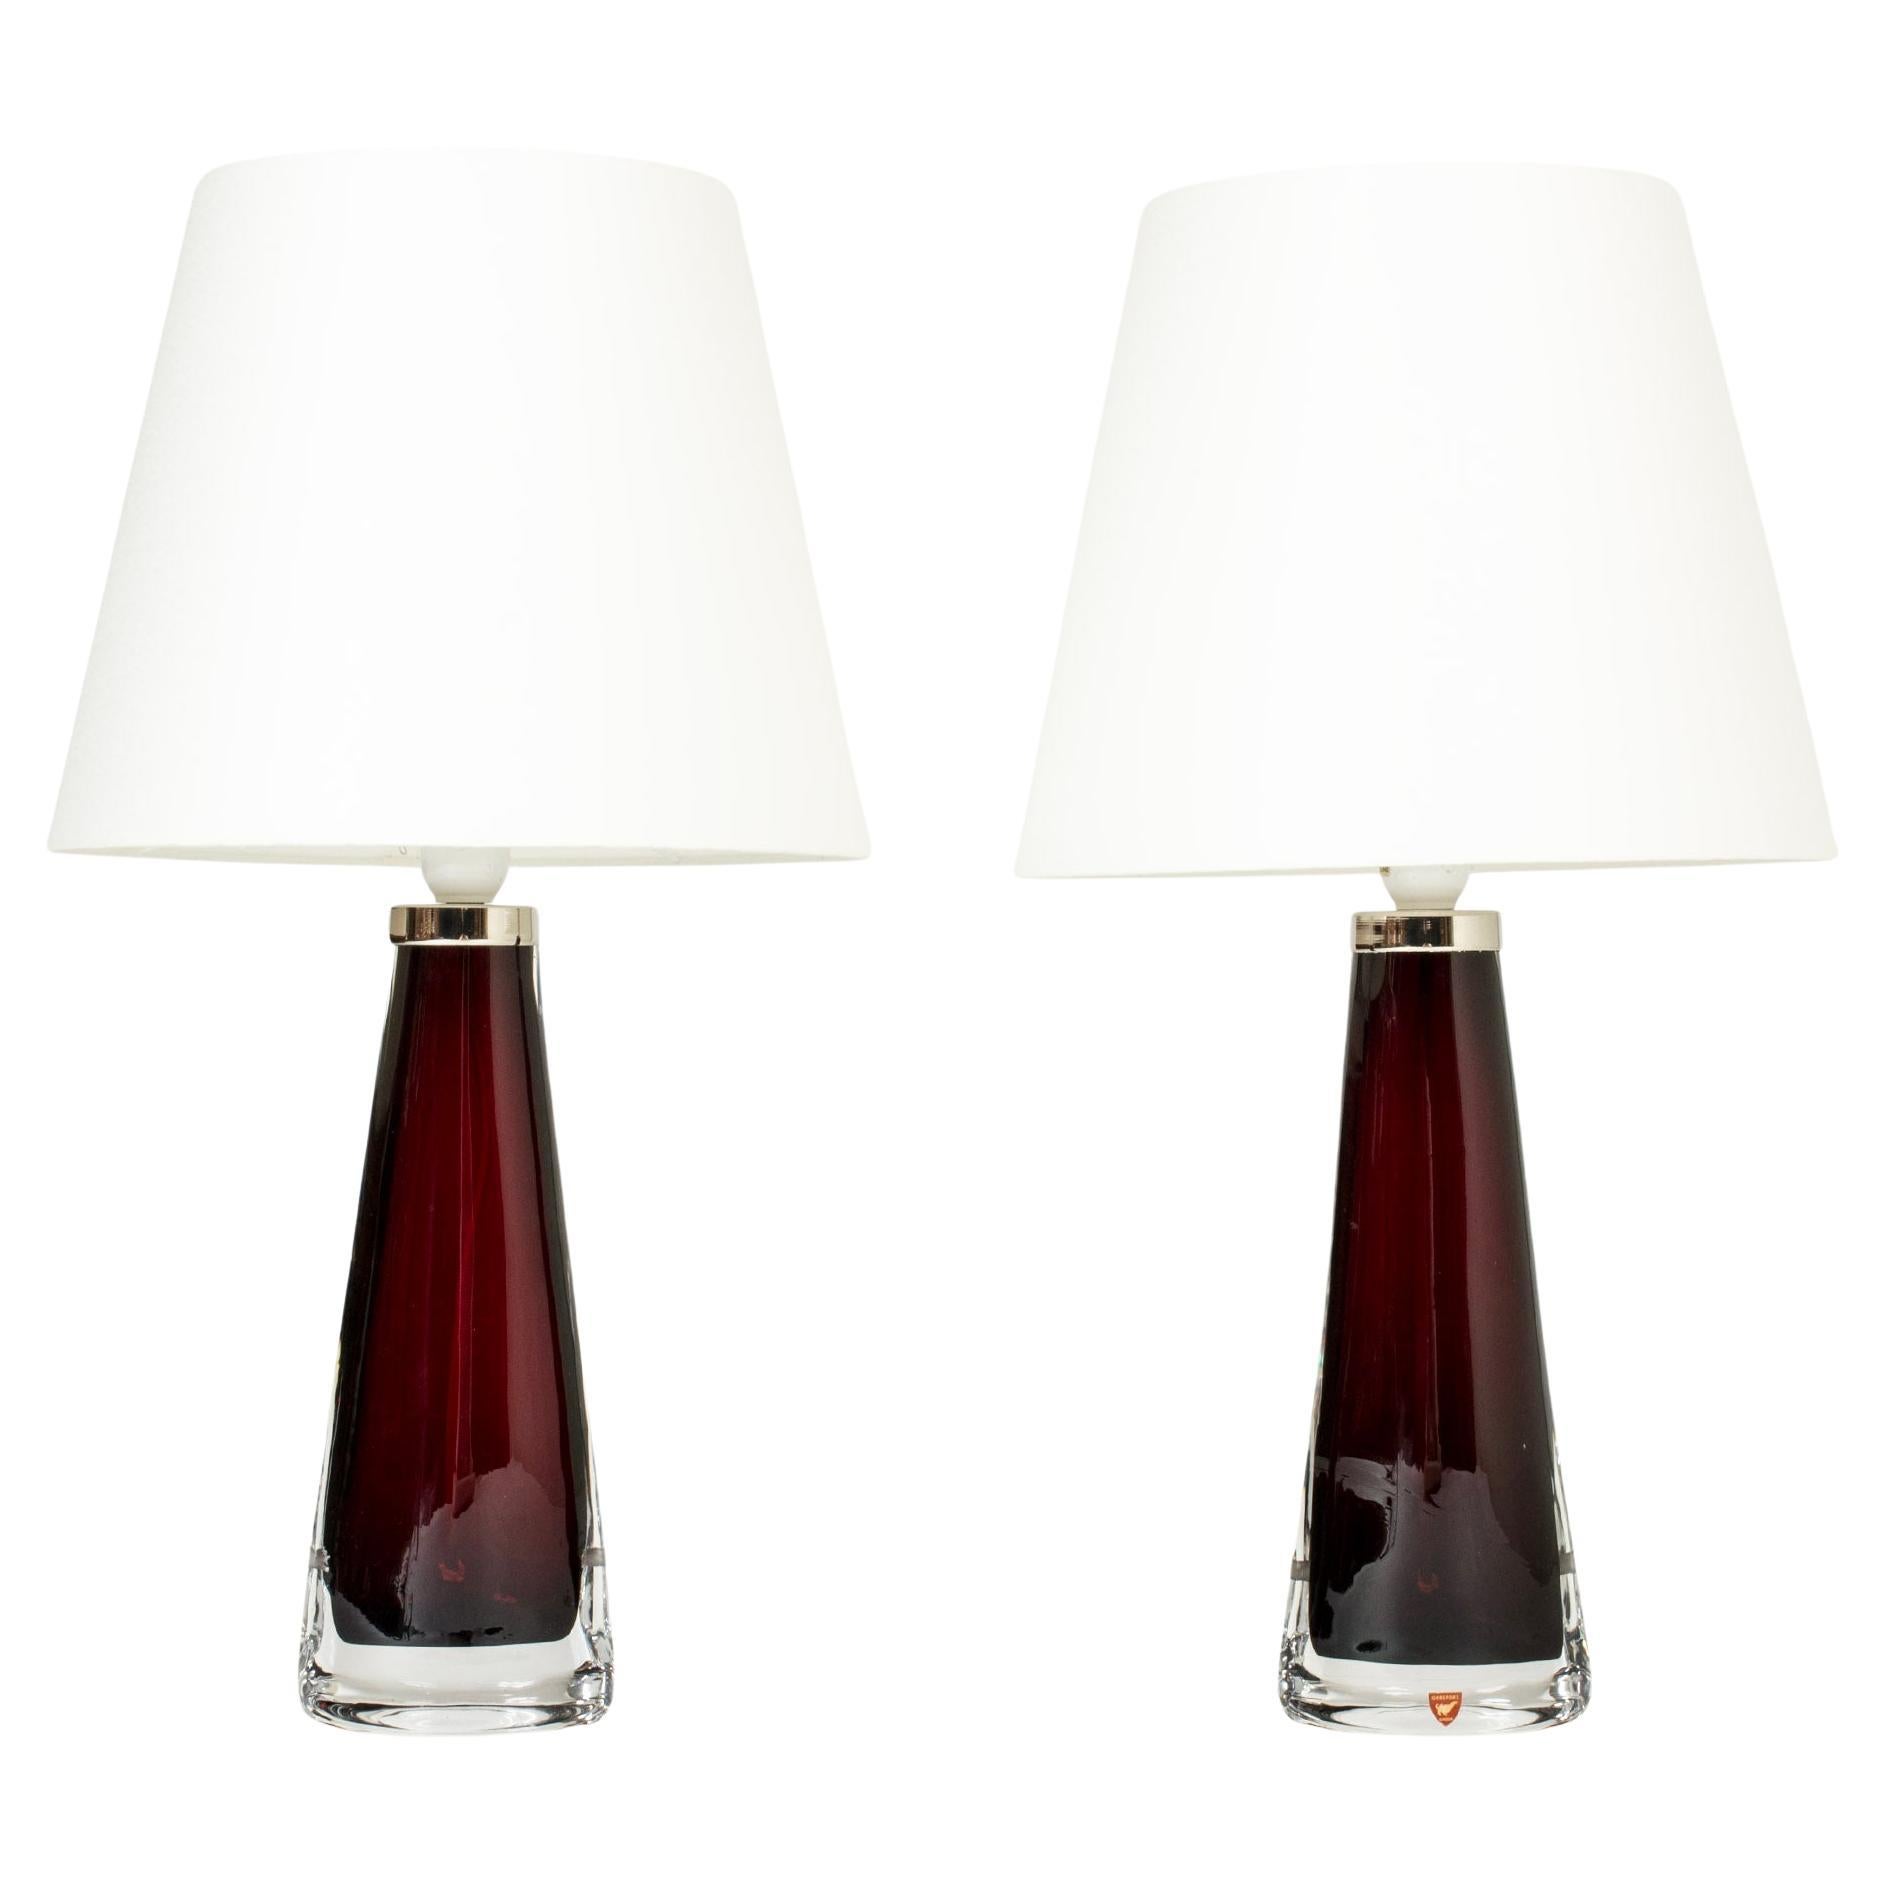 Midcentury Glass Table Lamps by Carl Fagerlund, Orrefors, Sweden, 1960s For Sale